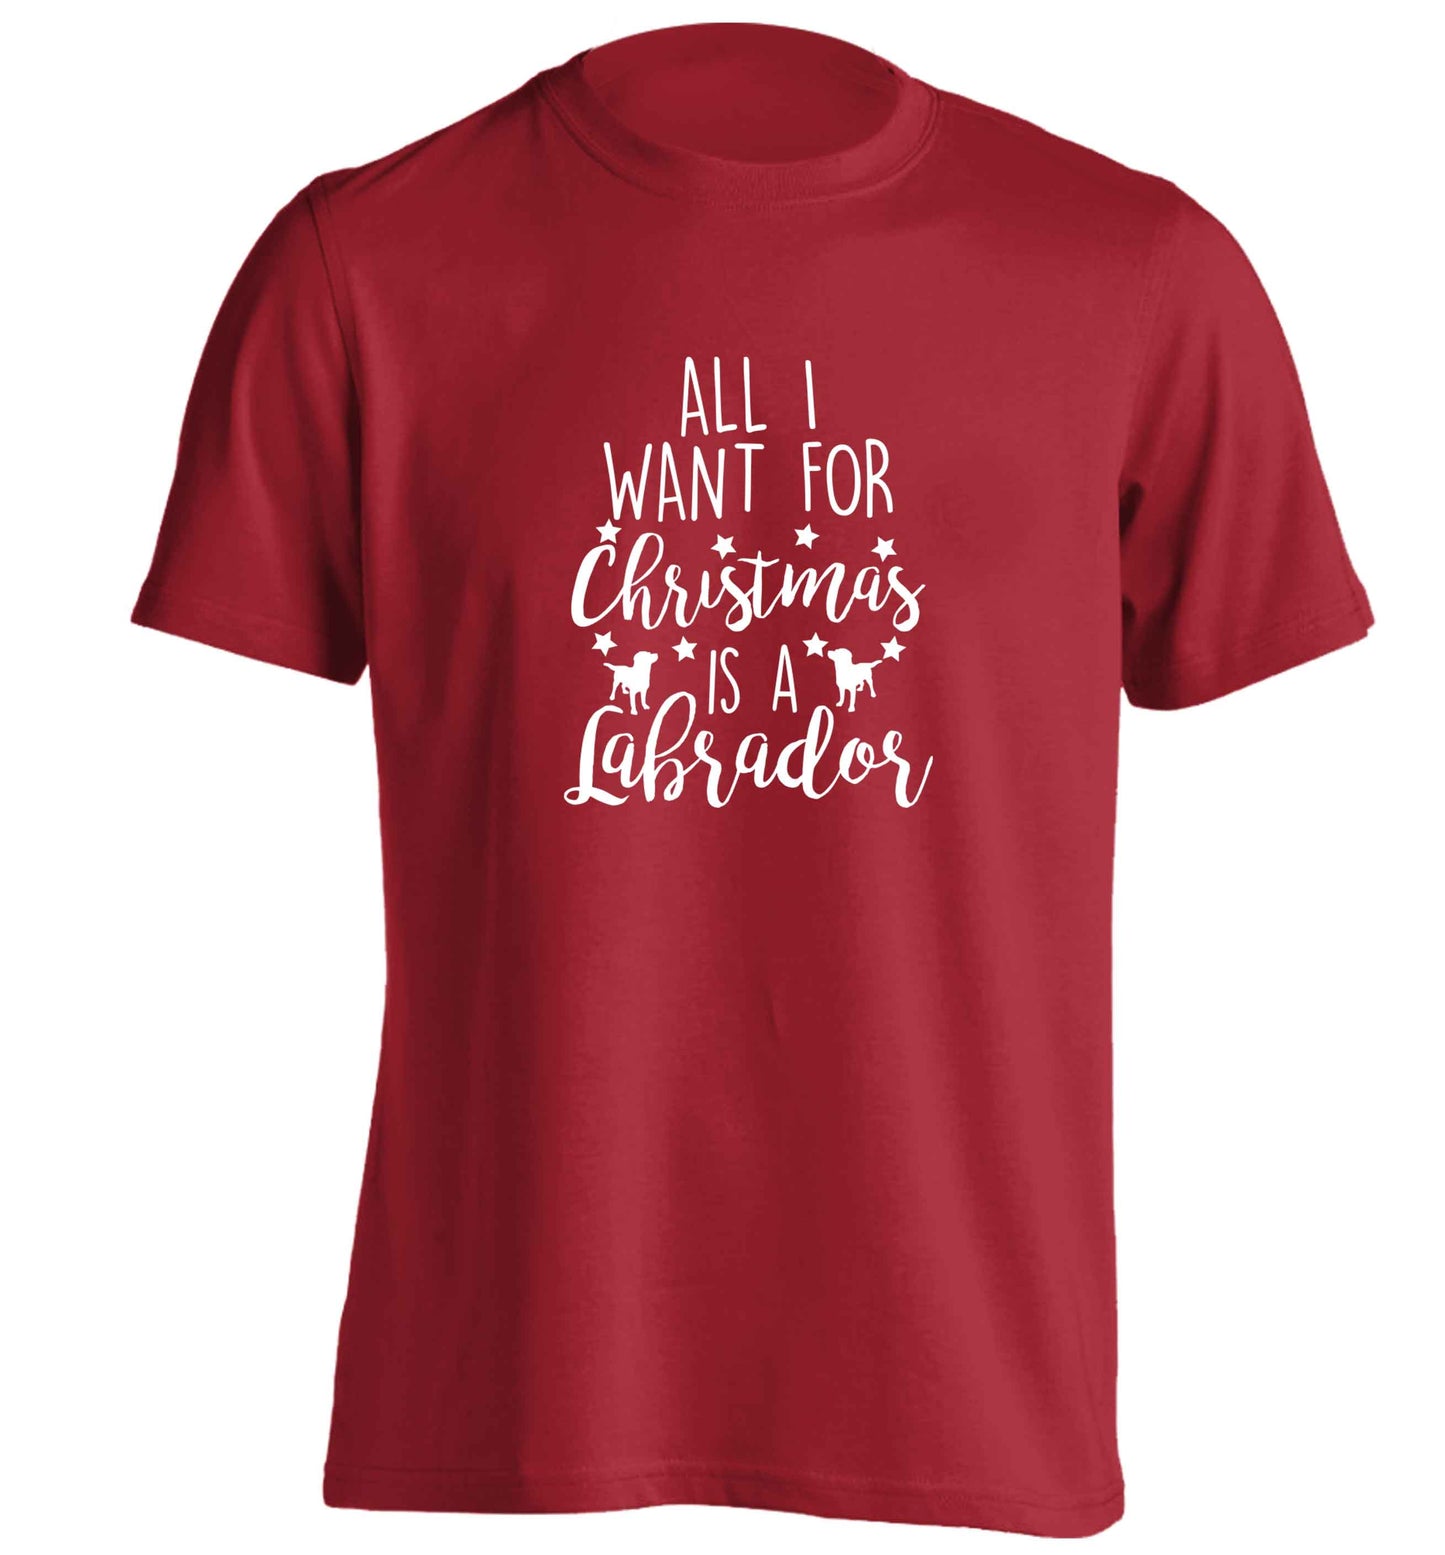 All I want for Christmas is a labrador adults unisex red Tshirt 2XL